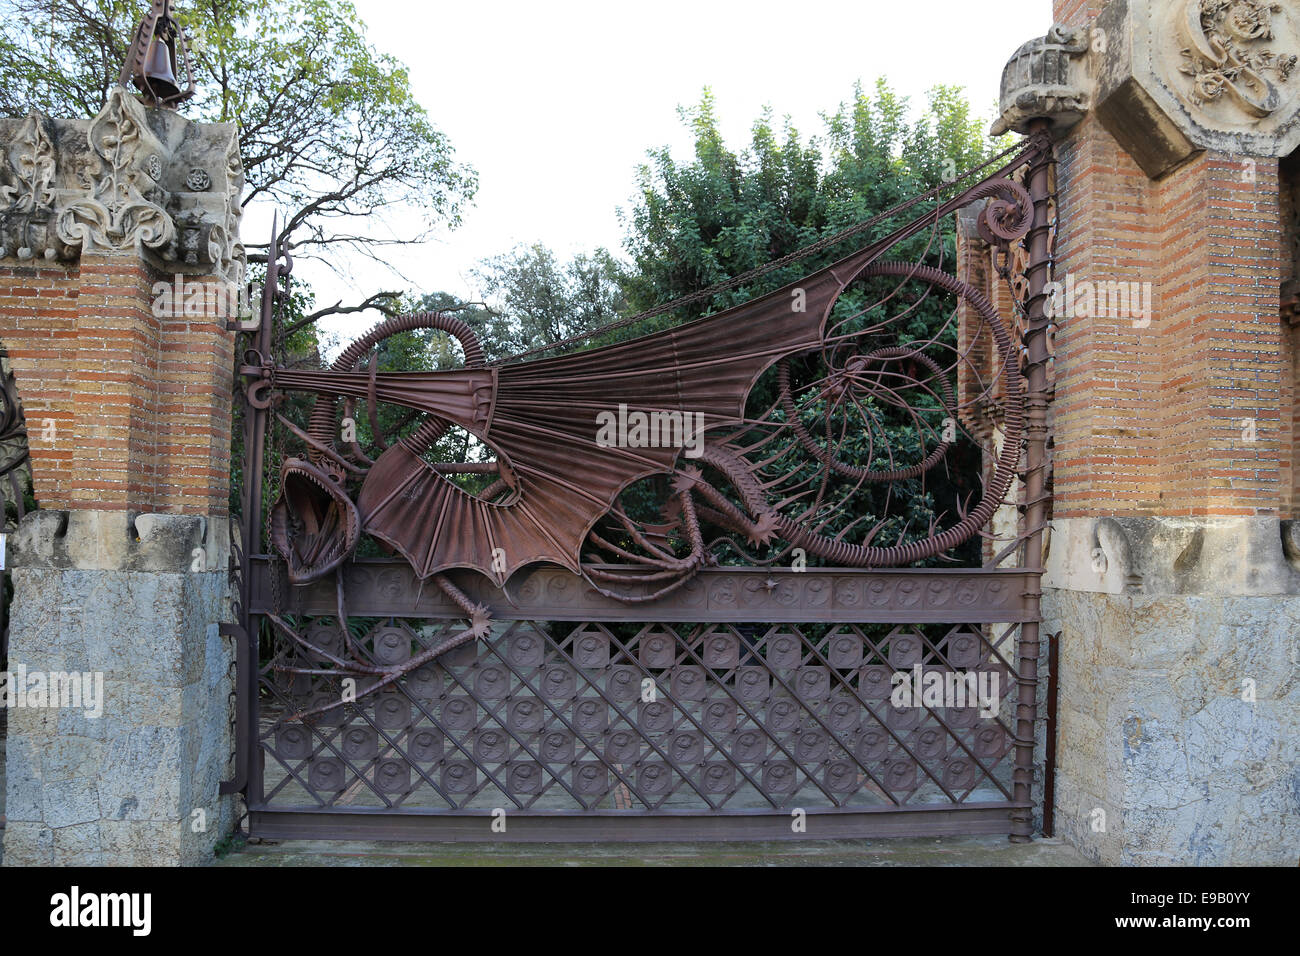 Modernist. Spain. Barcelona. Guell Pavilions.1884-1887. Built  by Antonio Gaudi (1852-1926). The Iron dragon gate. Stock Photo